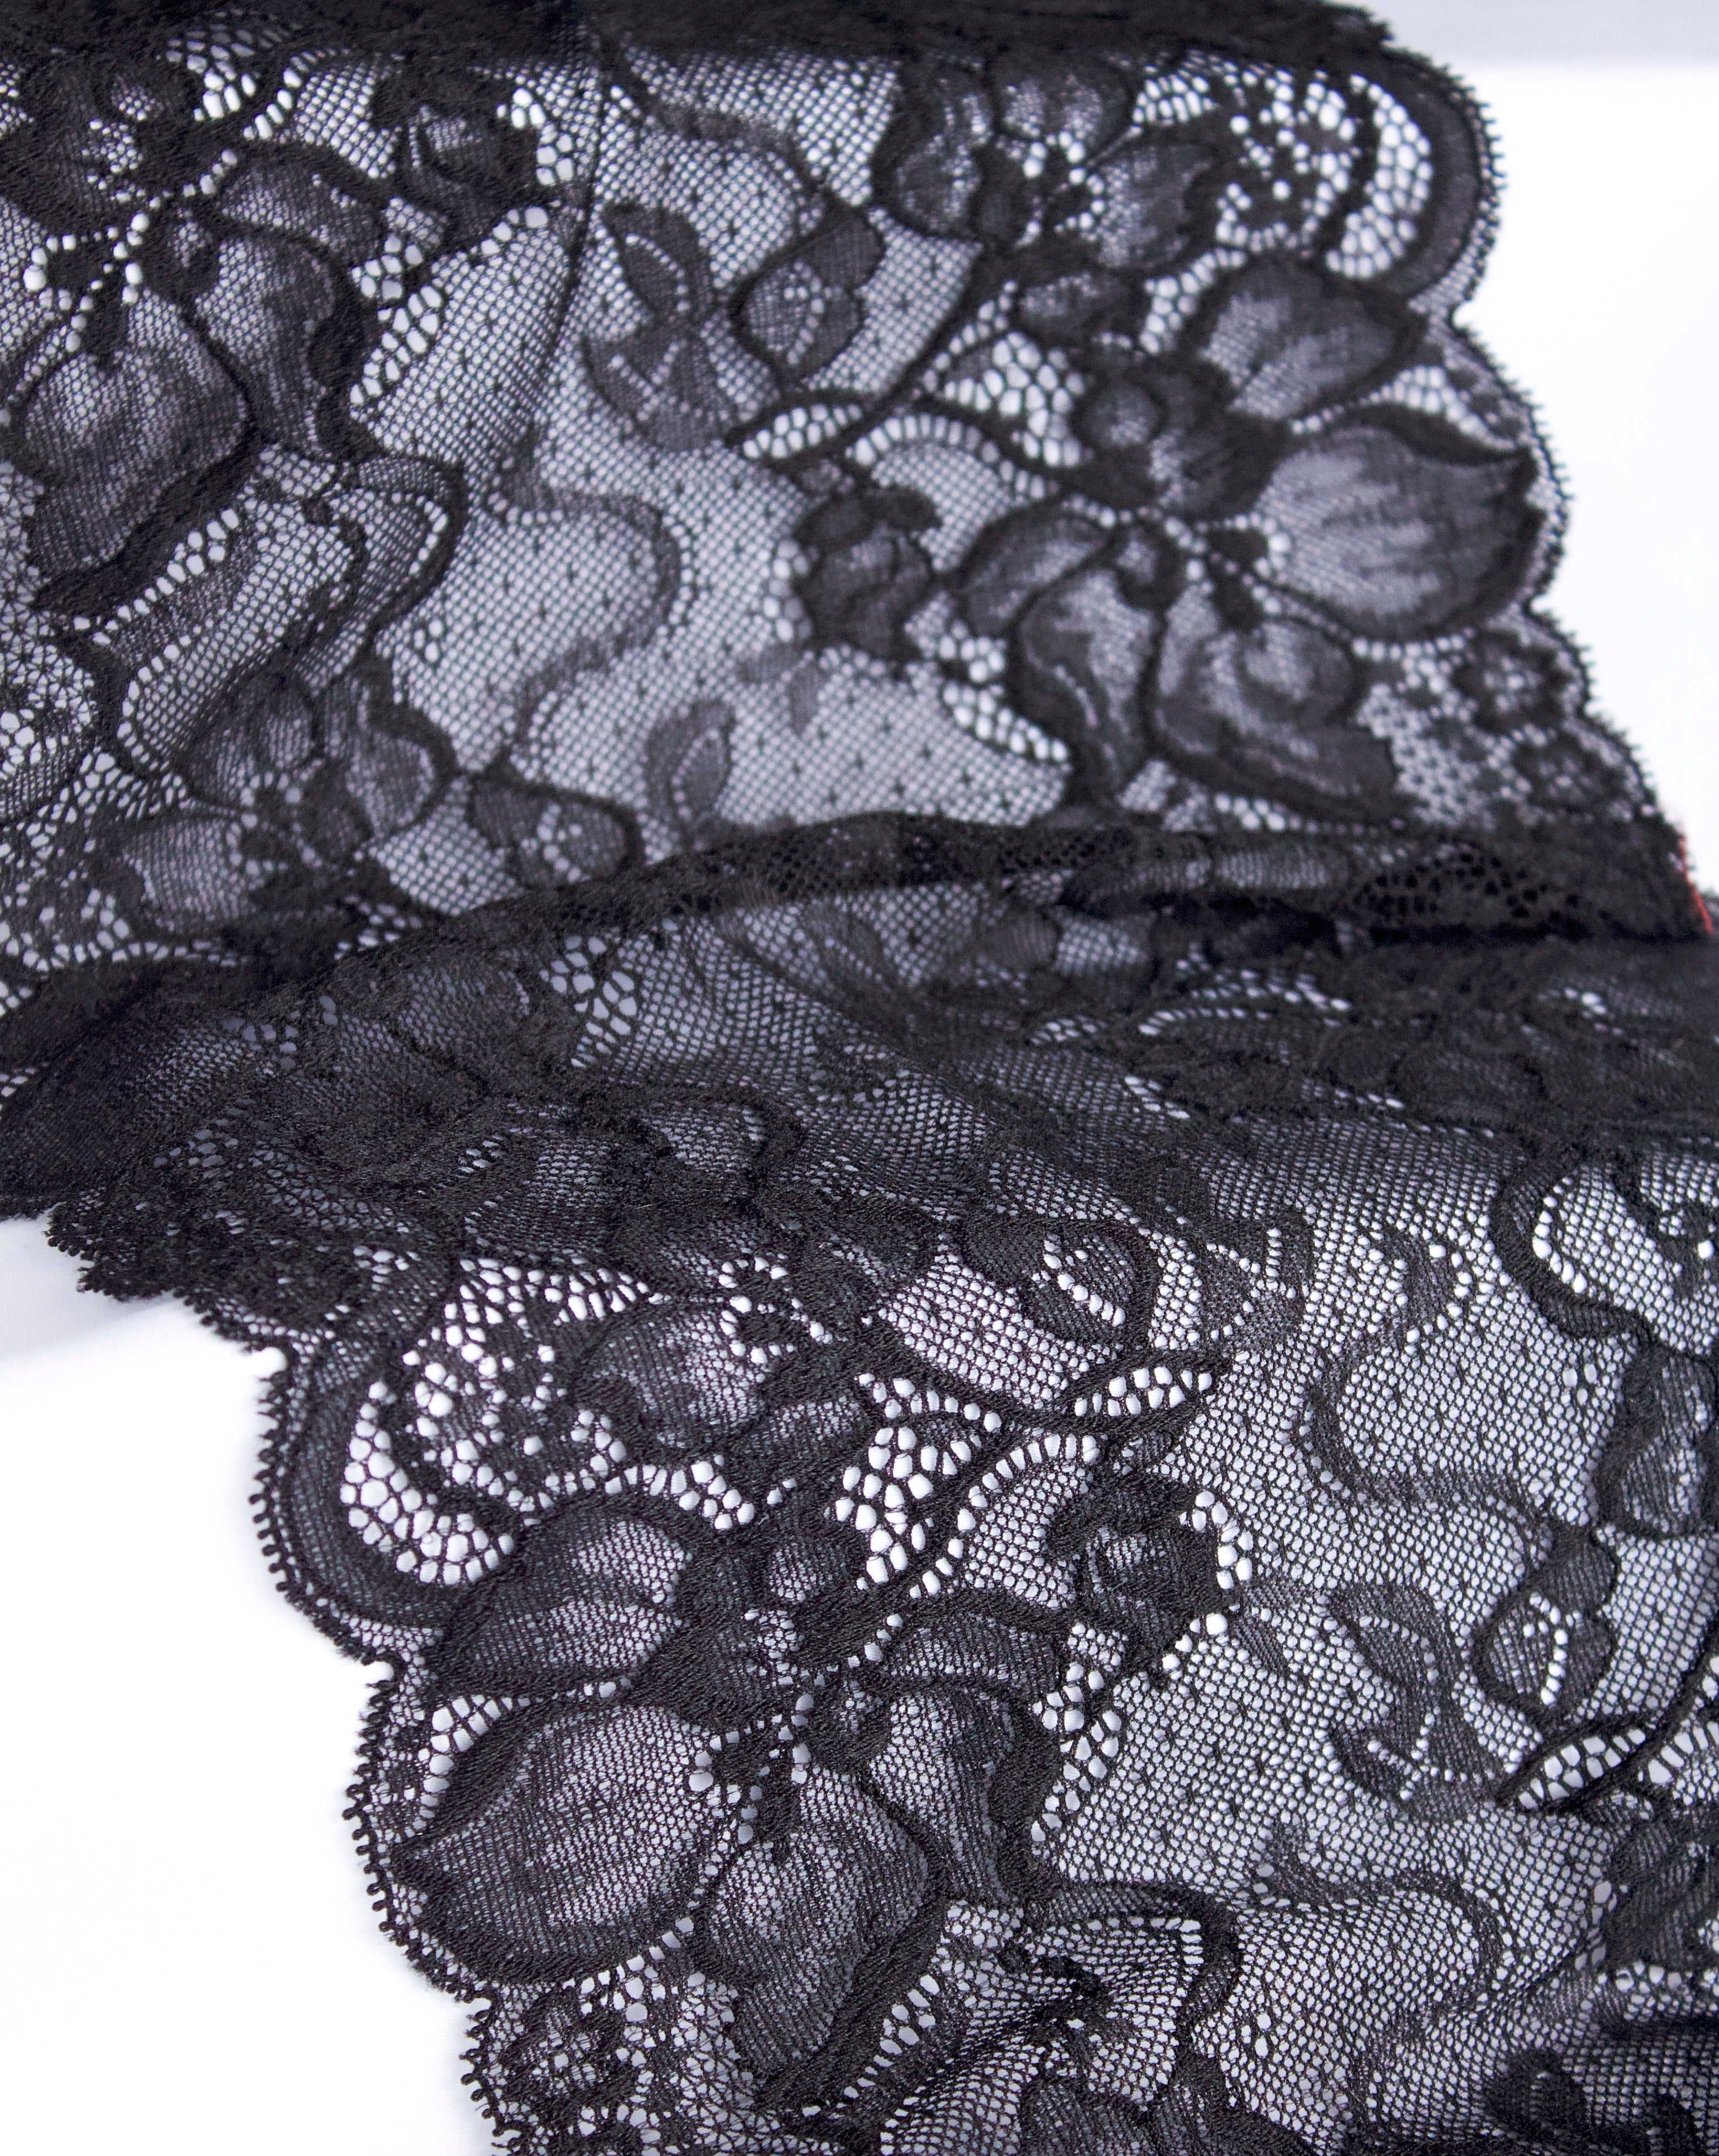 Close up of Rubies Bras black lace fabric.